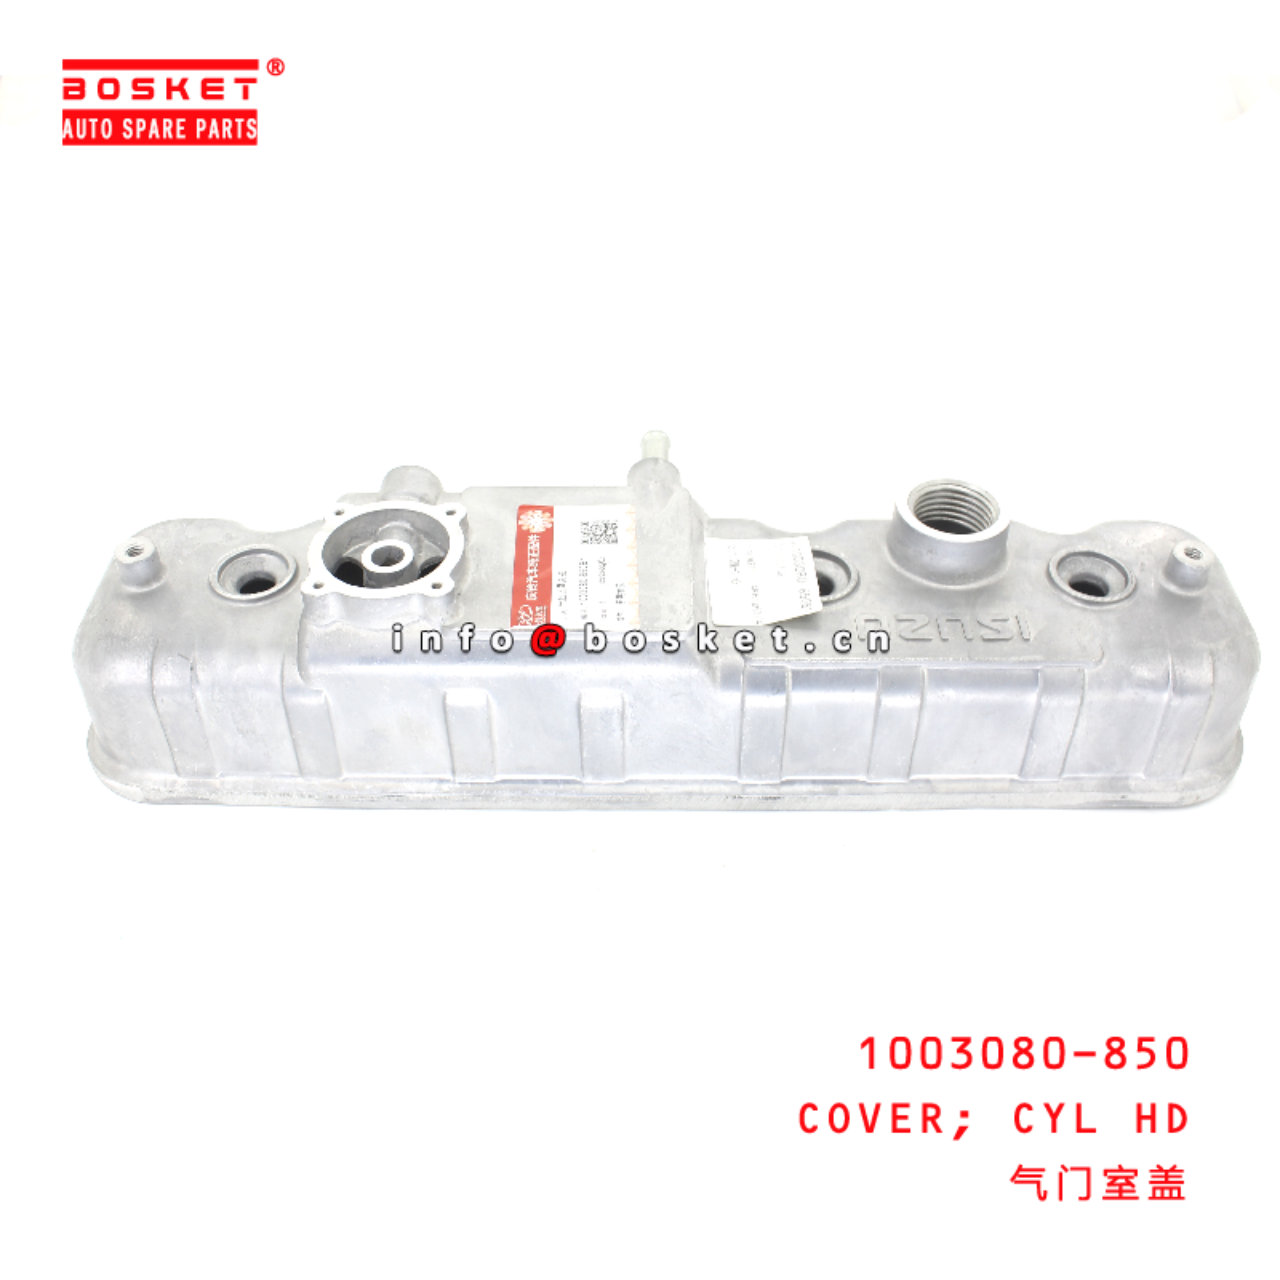 1003080-850 Head To Cover Gasket suitable for ISUZU NKR77